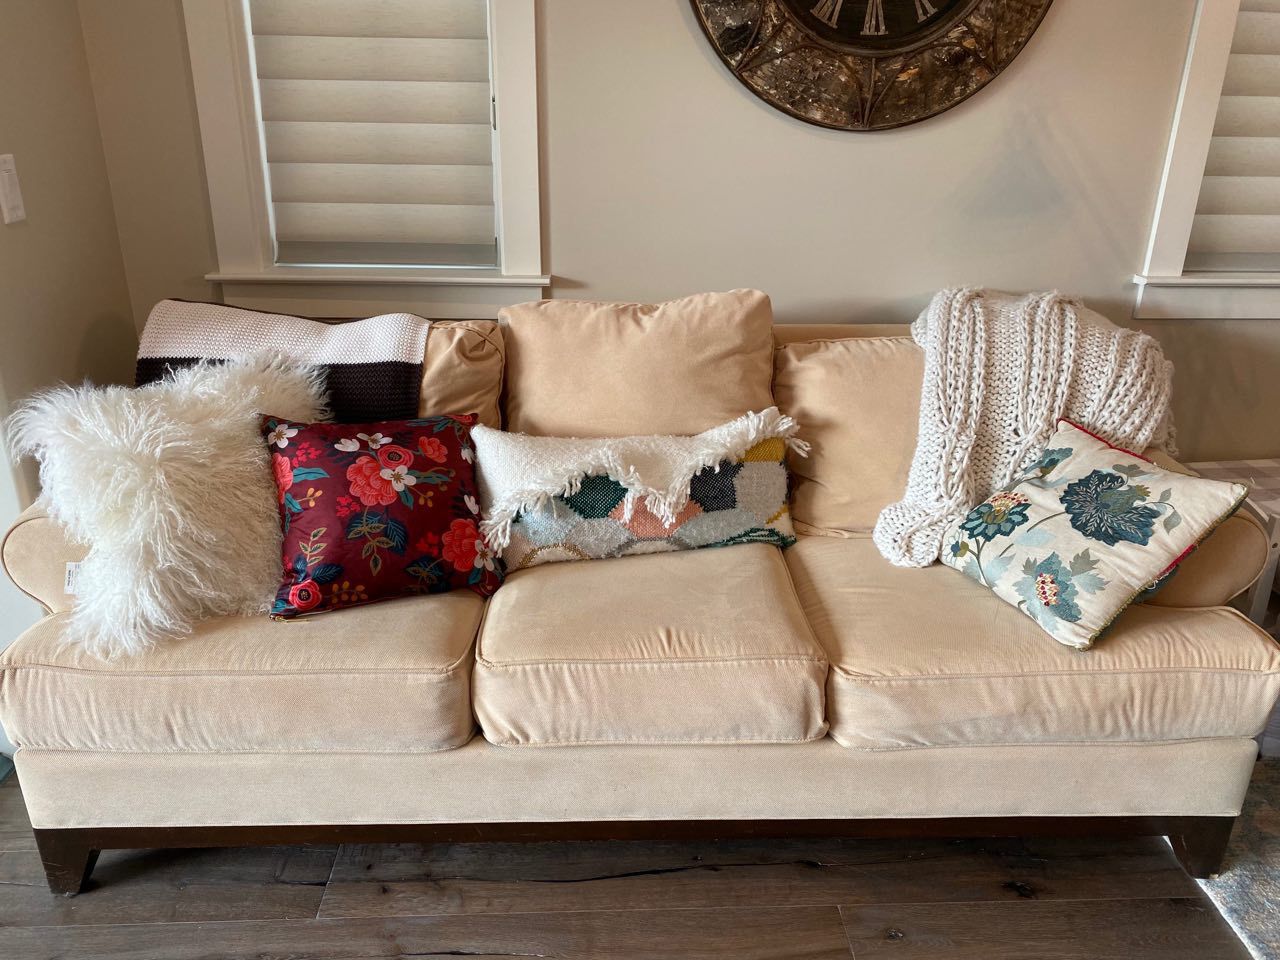 Loveseat and couch